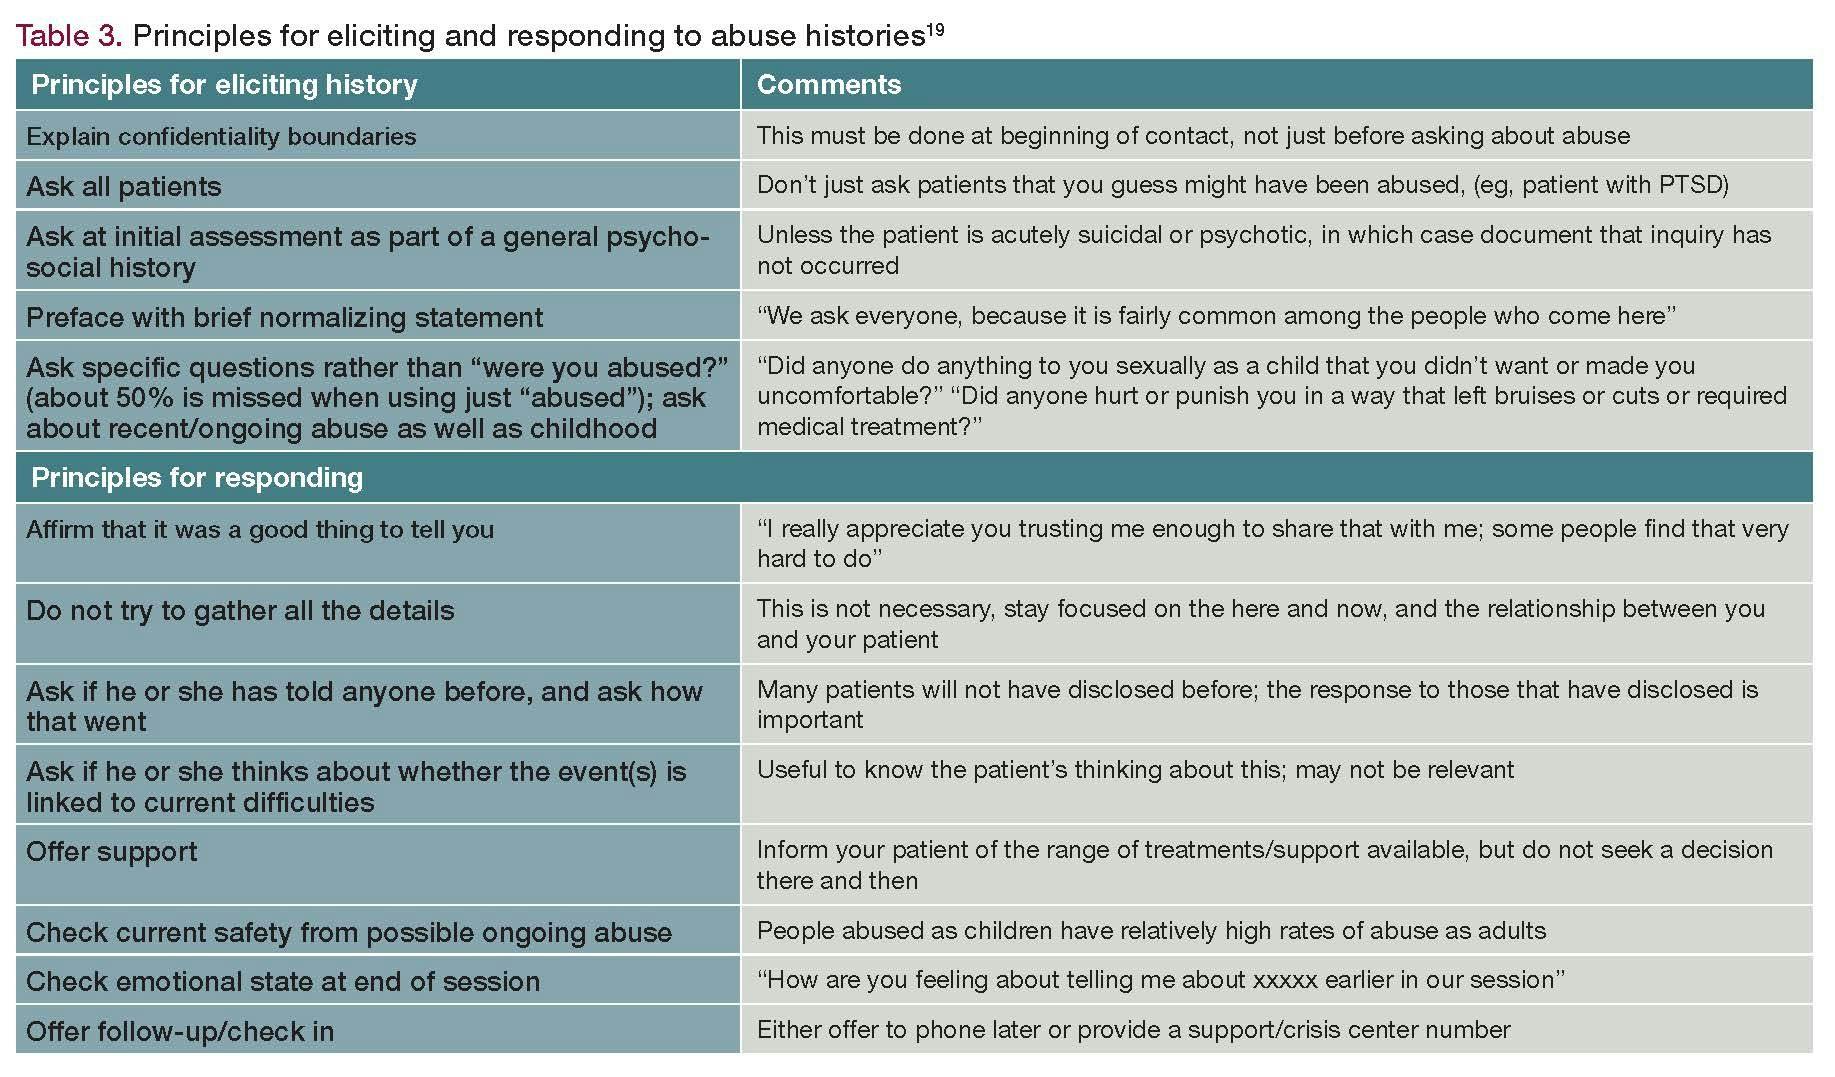 Table 3. Principles for eliciting and responding to abuse histories